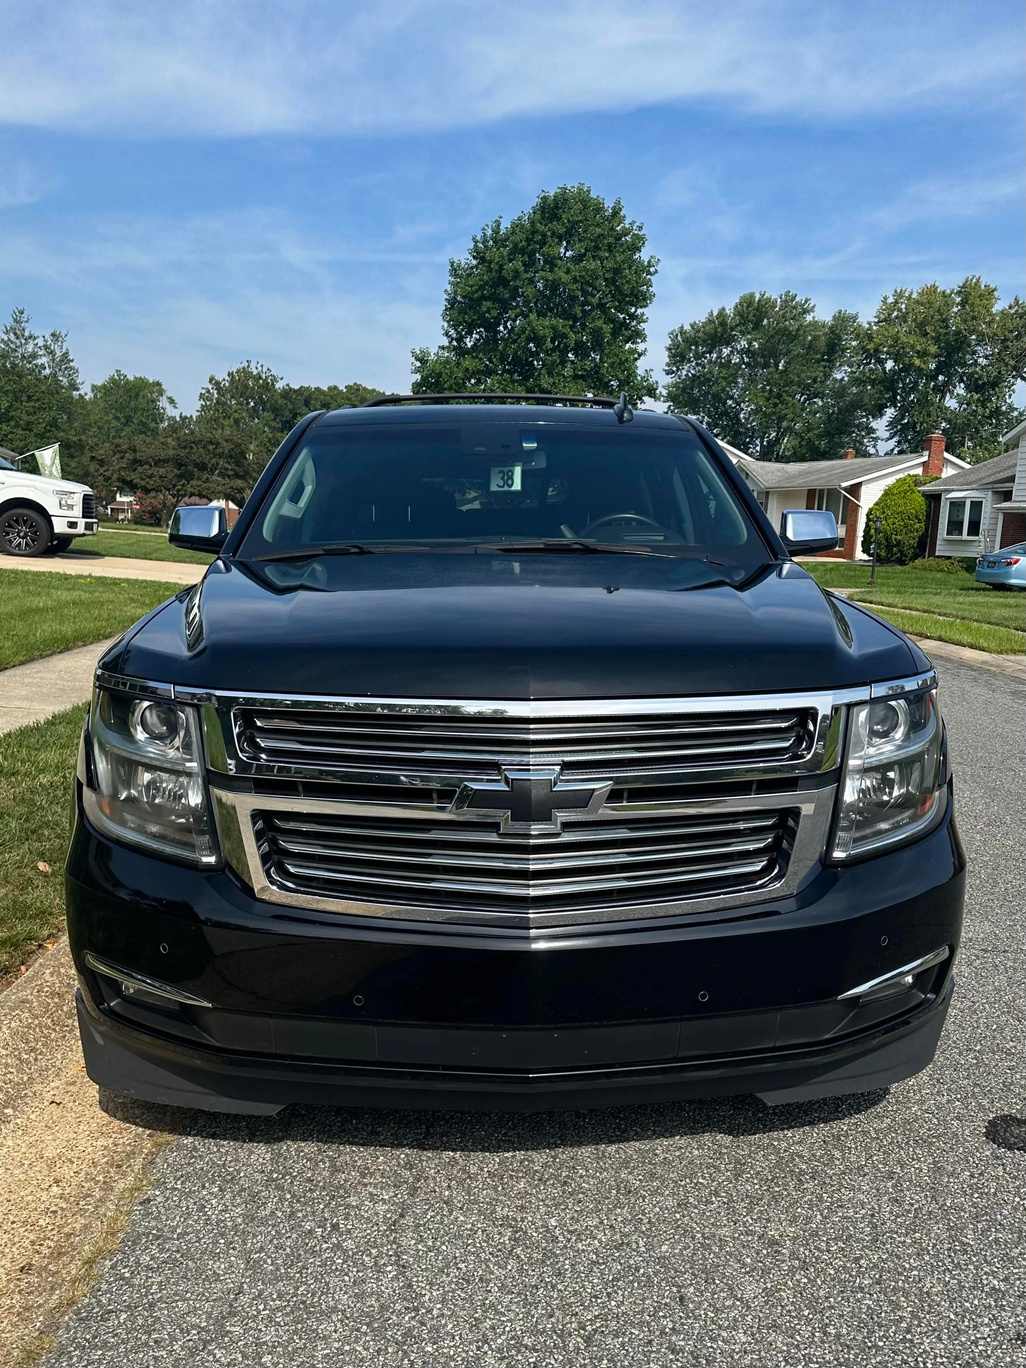 This Chevy Suburban received a premium exterior and basic interior detail.